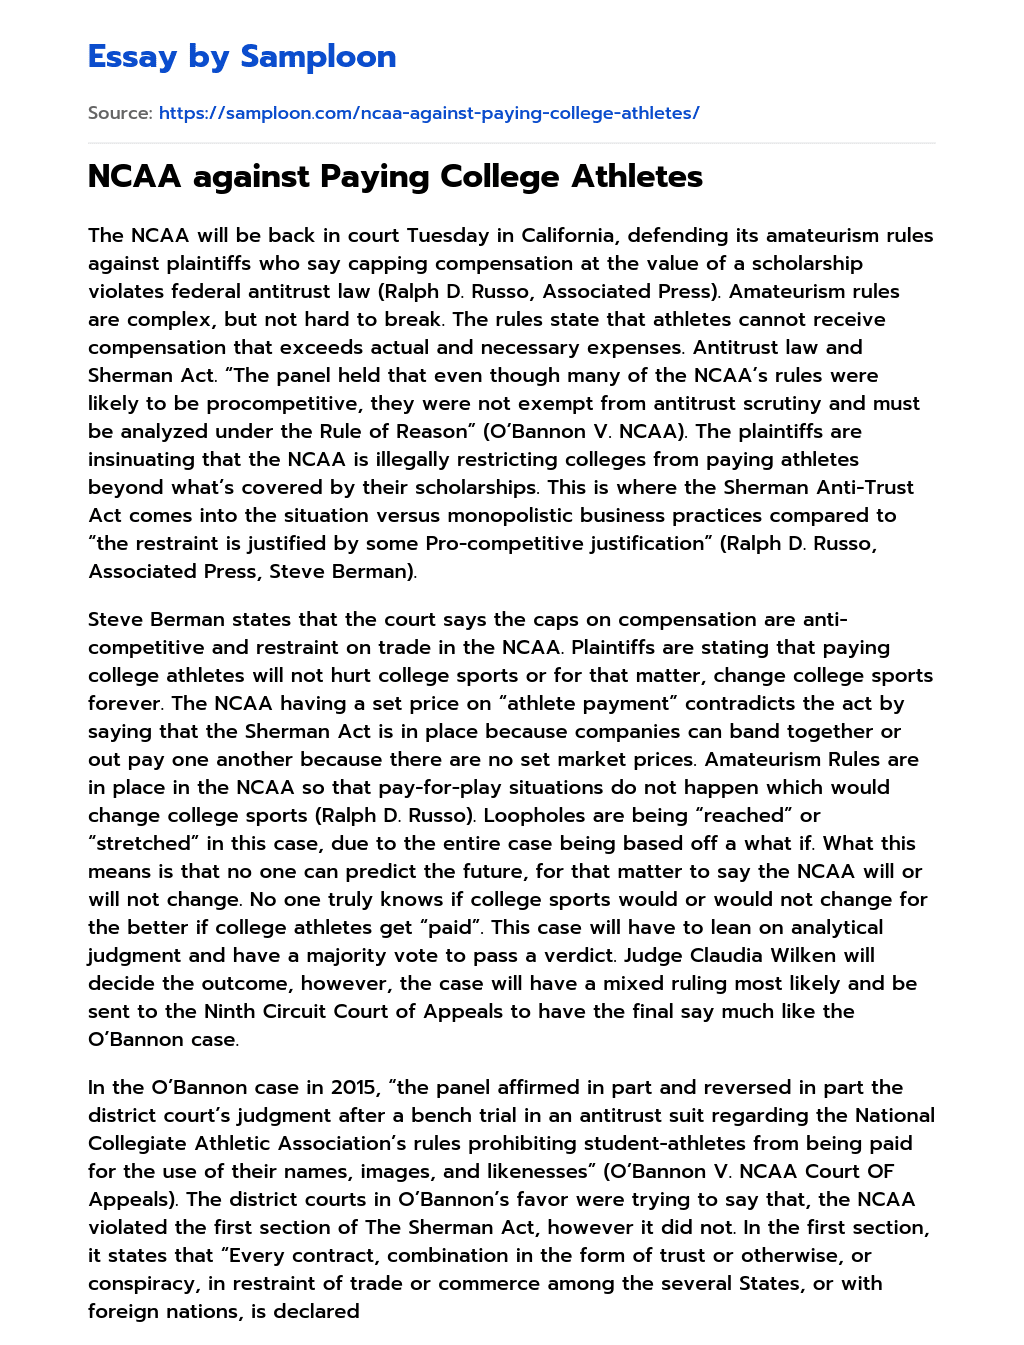 NCAA against Paying College Athletes essay